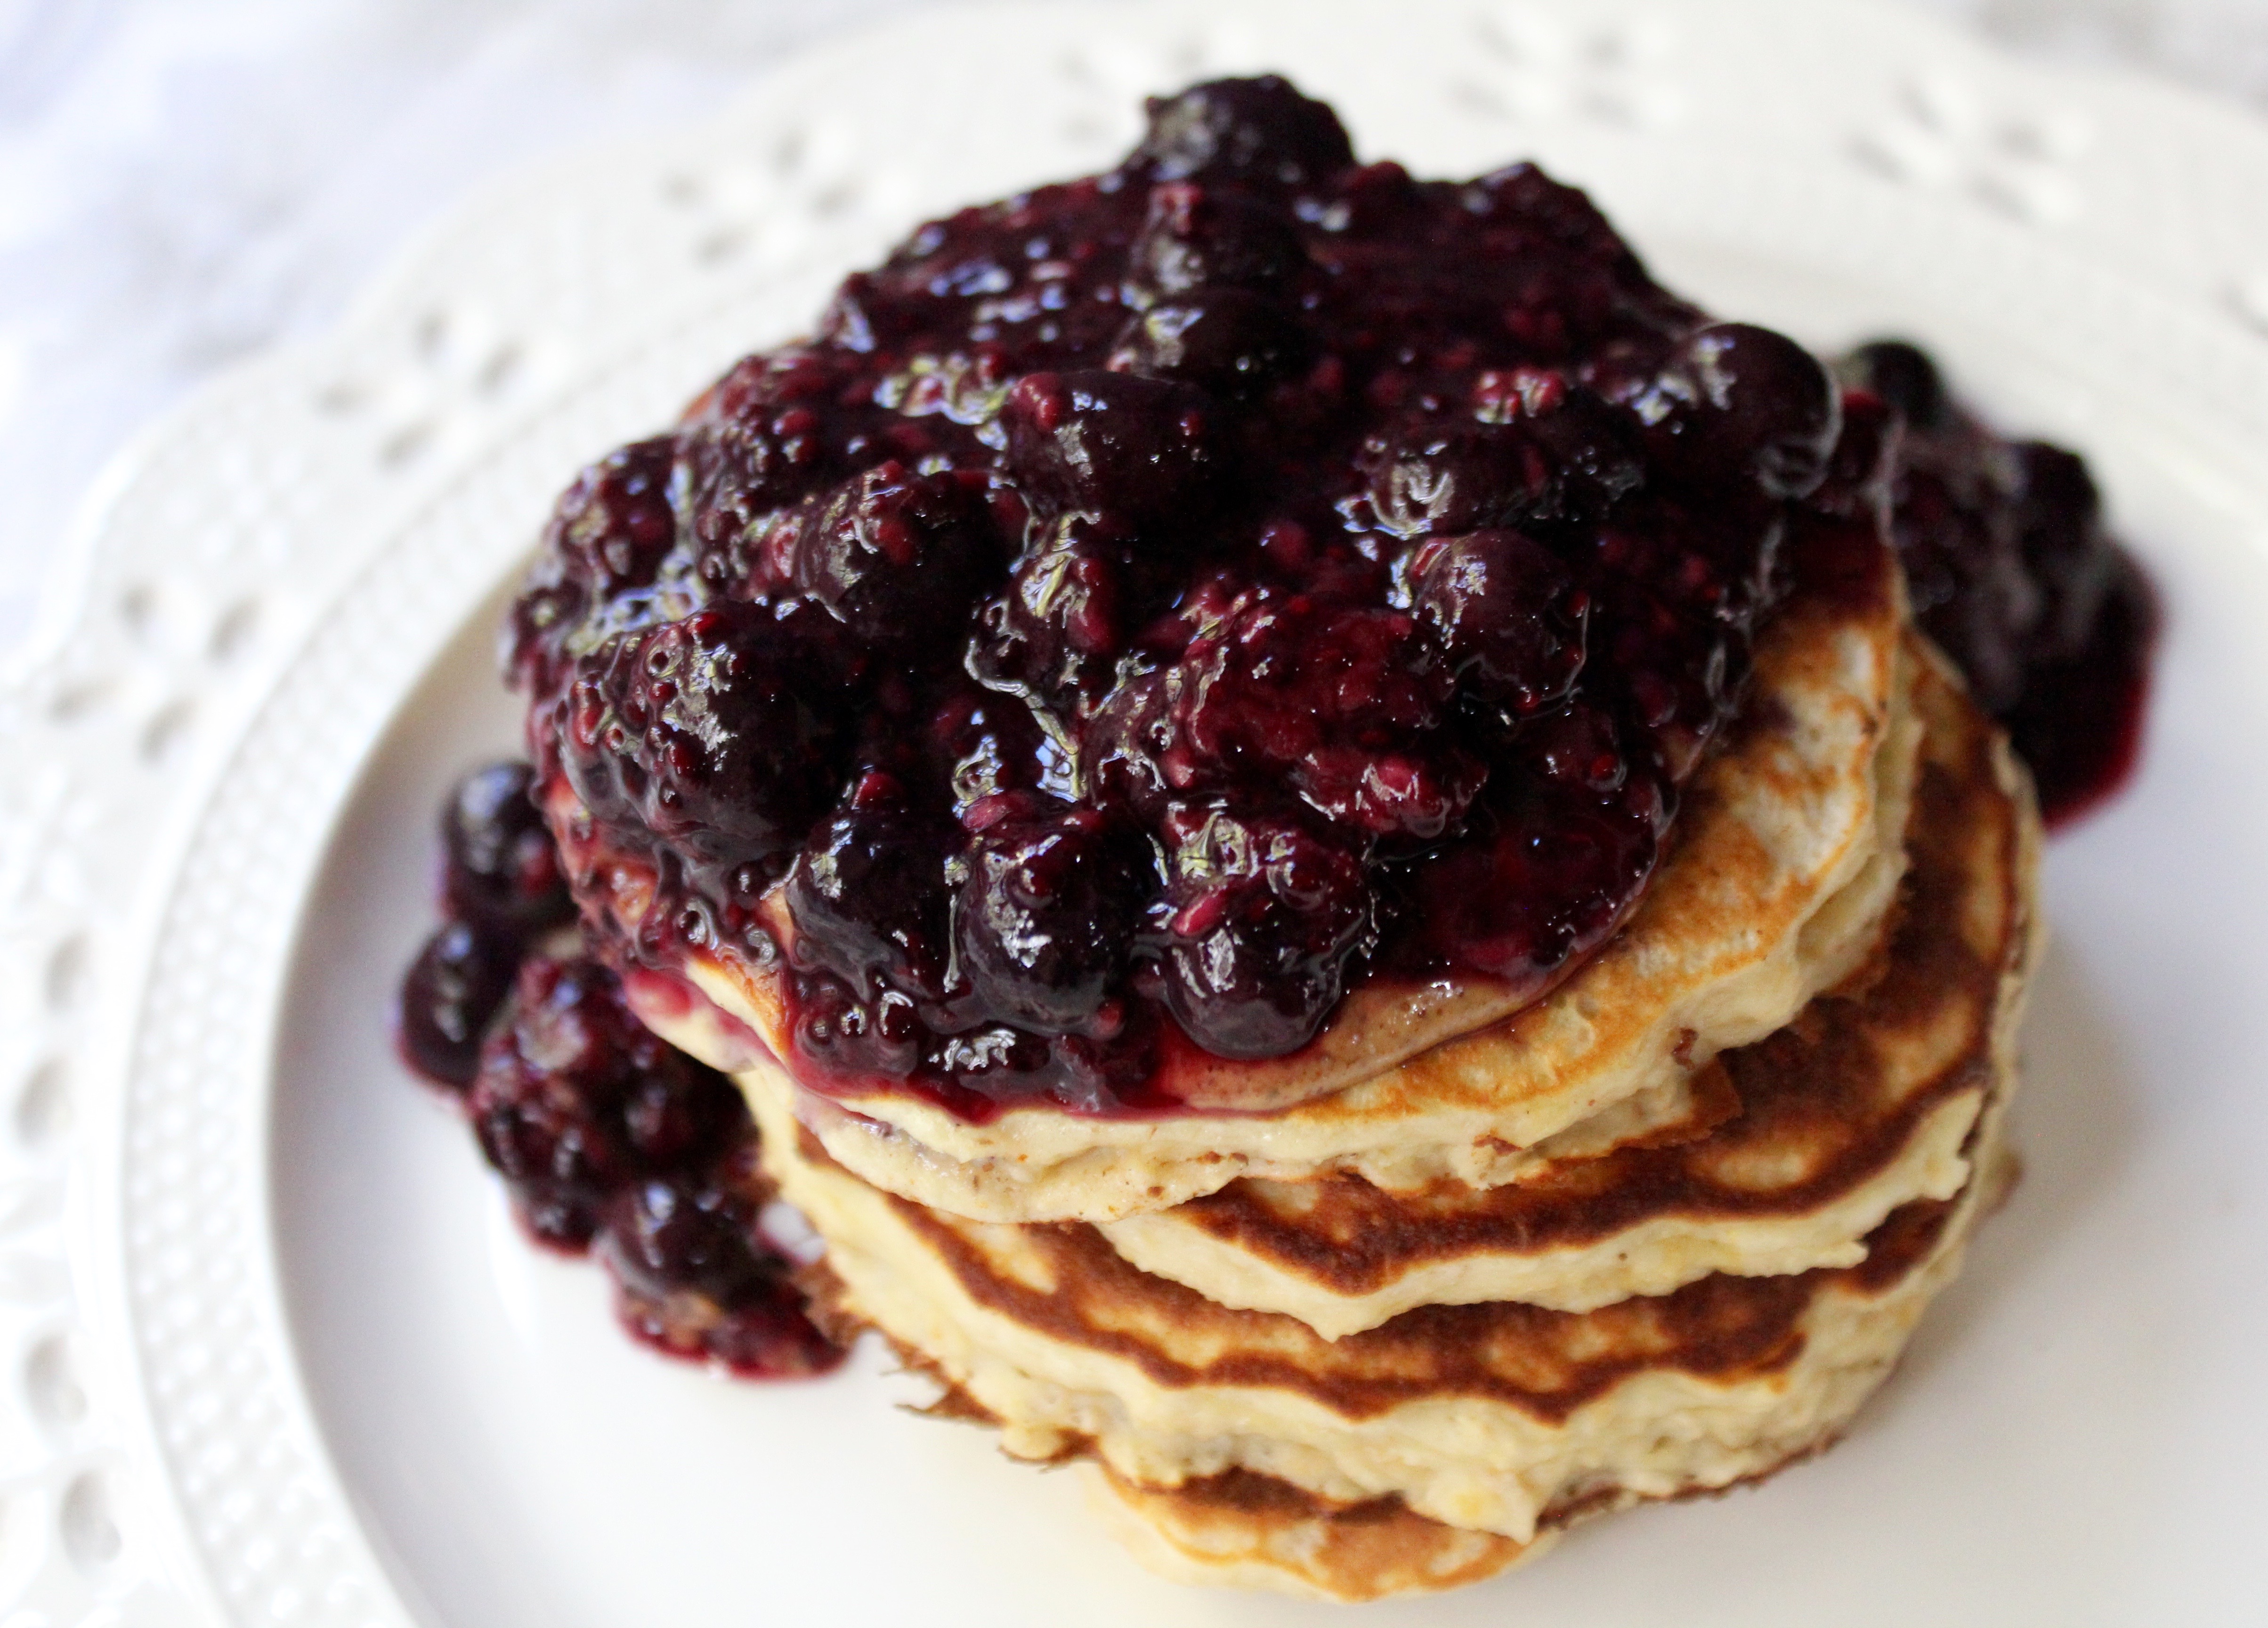 Banana Oatmeal Pancakes with Mixed Berry Compote – The Expat Dietitian